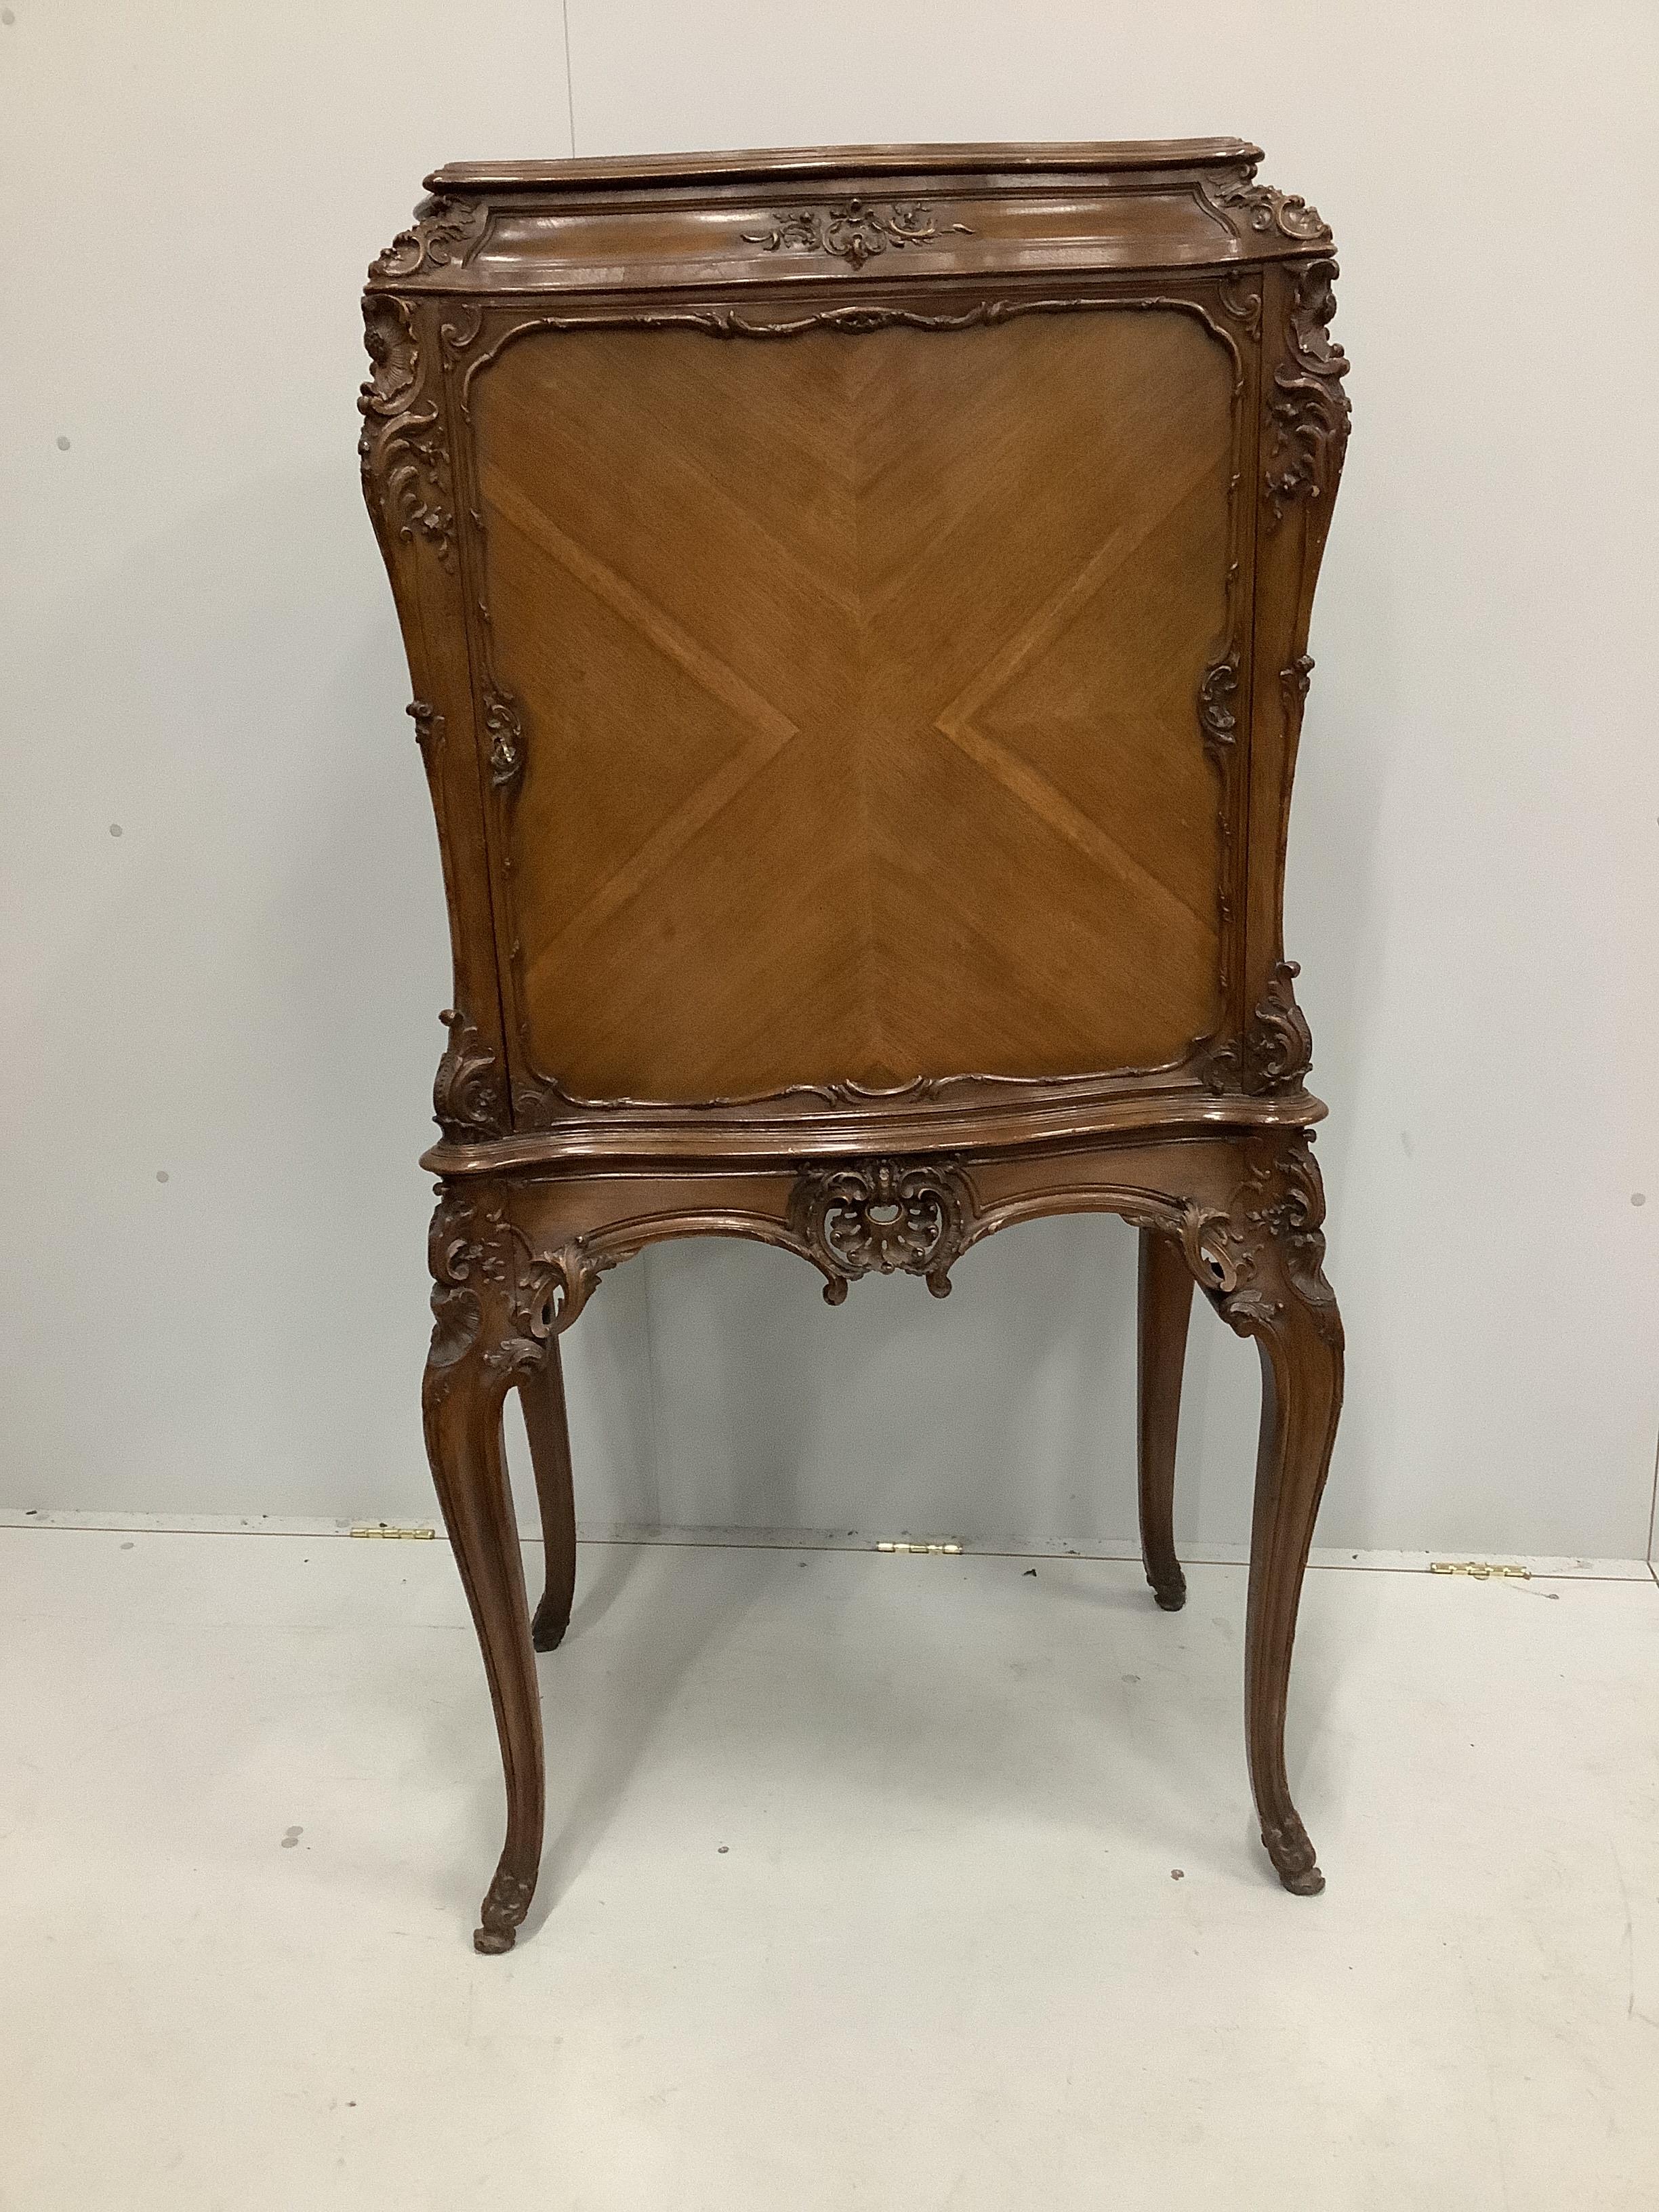 An early 20th century French mahogany side cabinet, width 74cm, depth 51cm, height 150cm